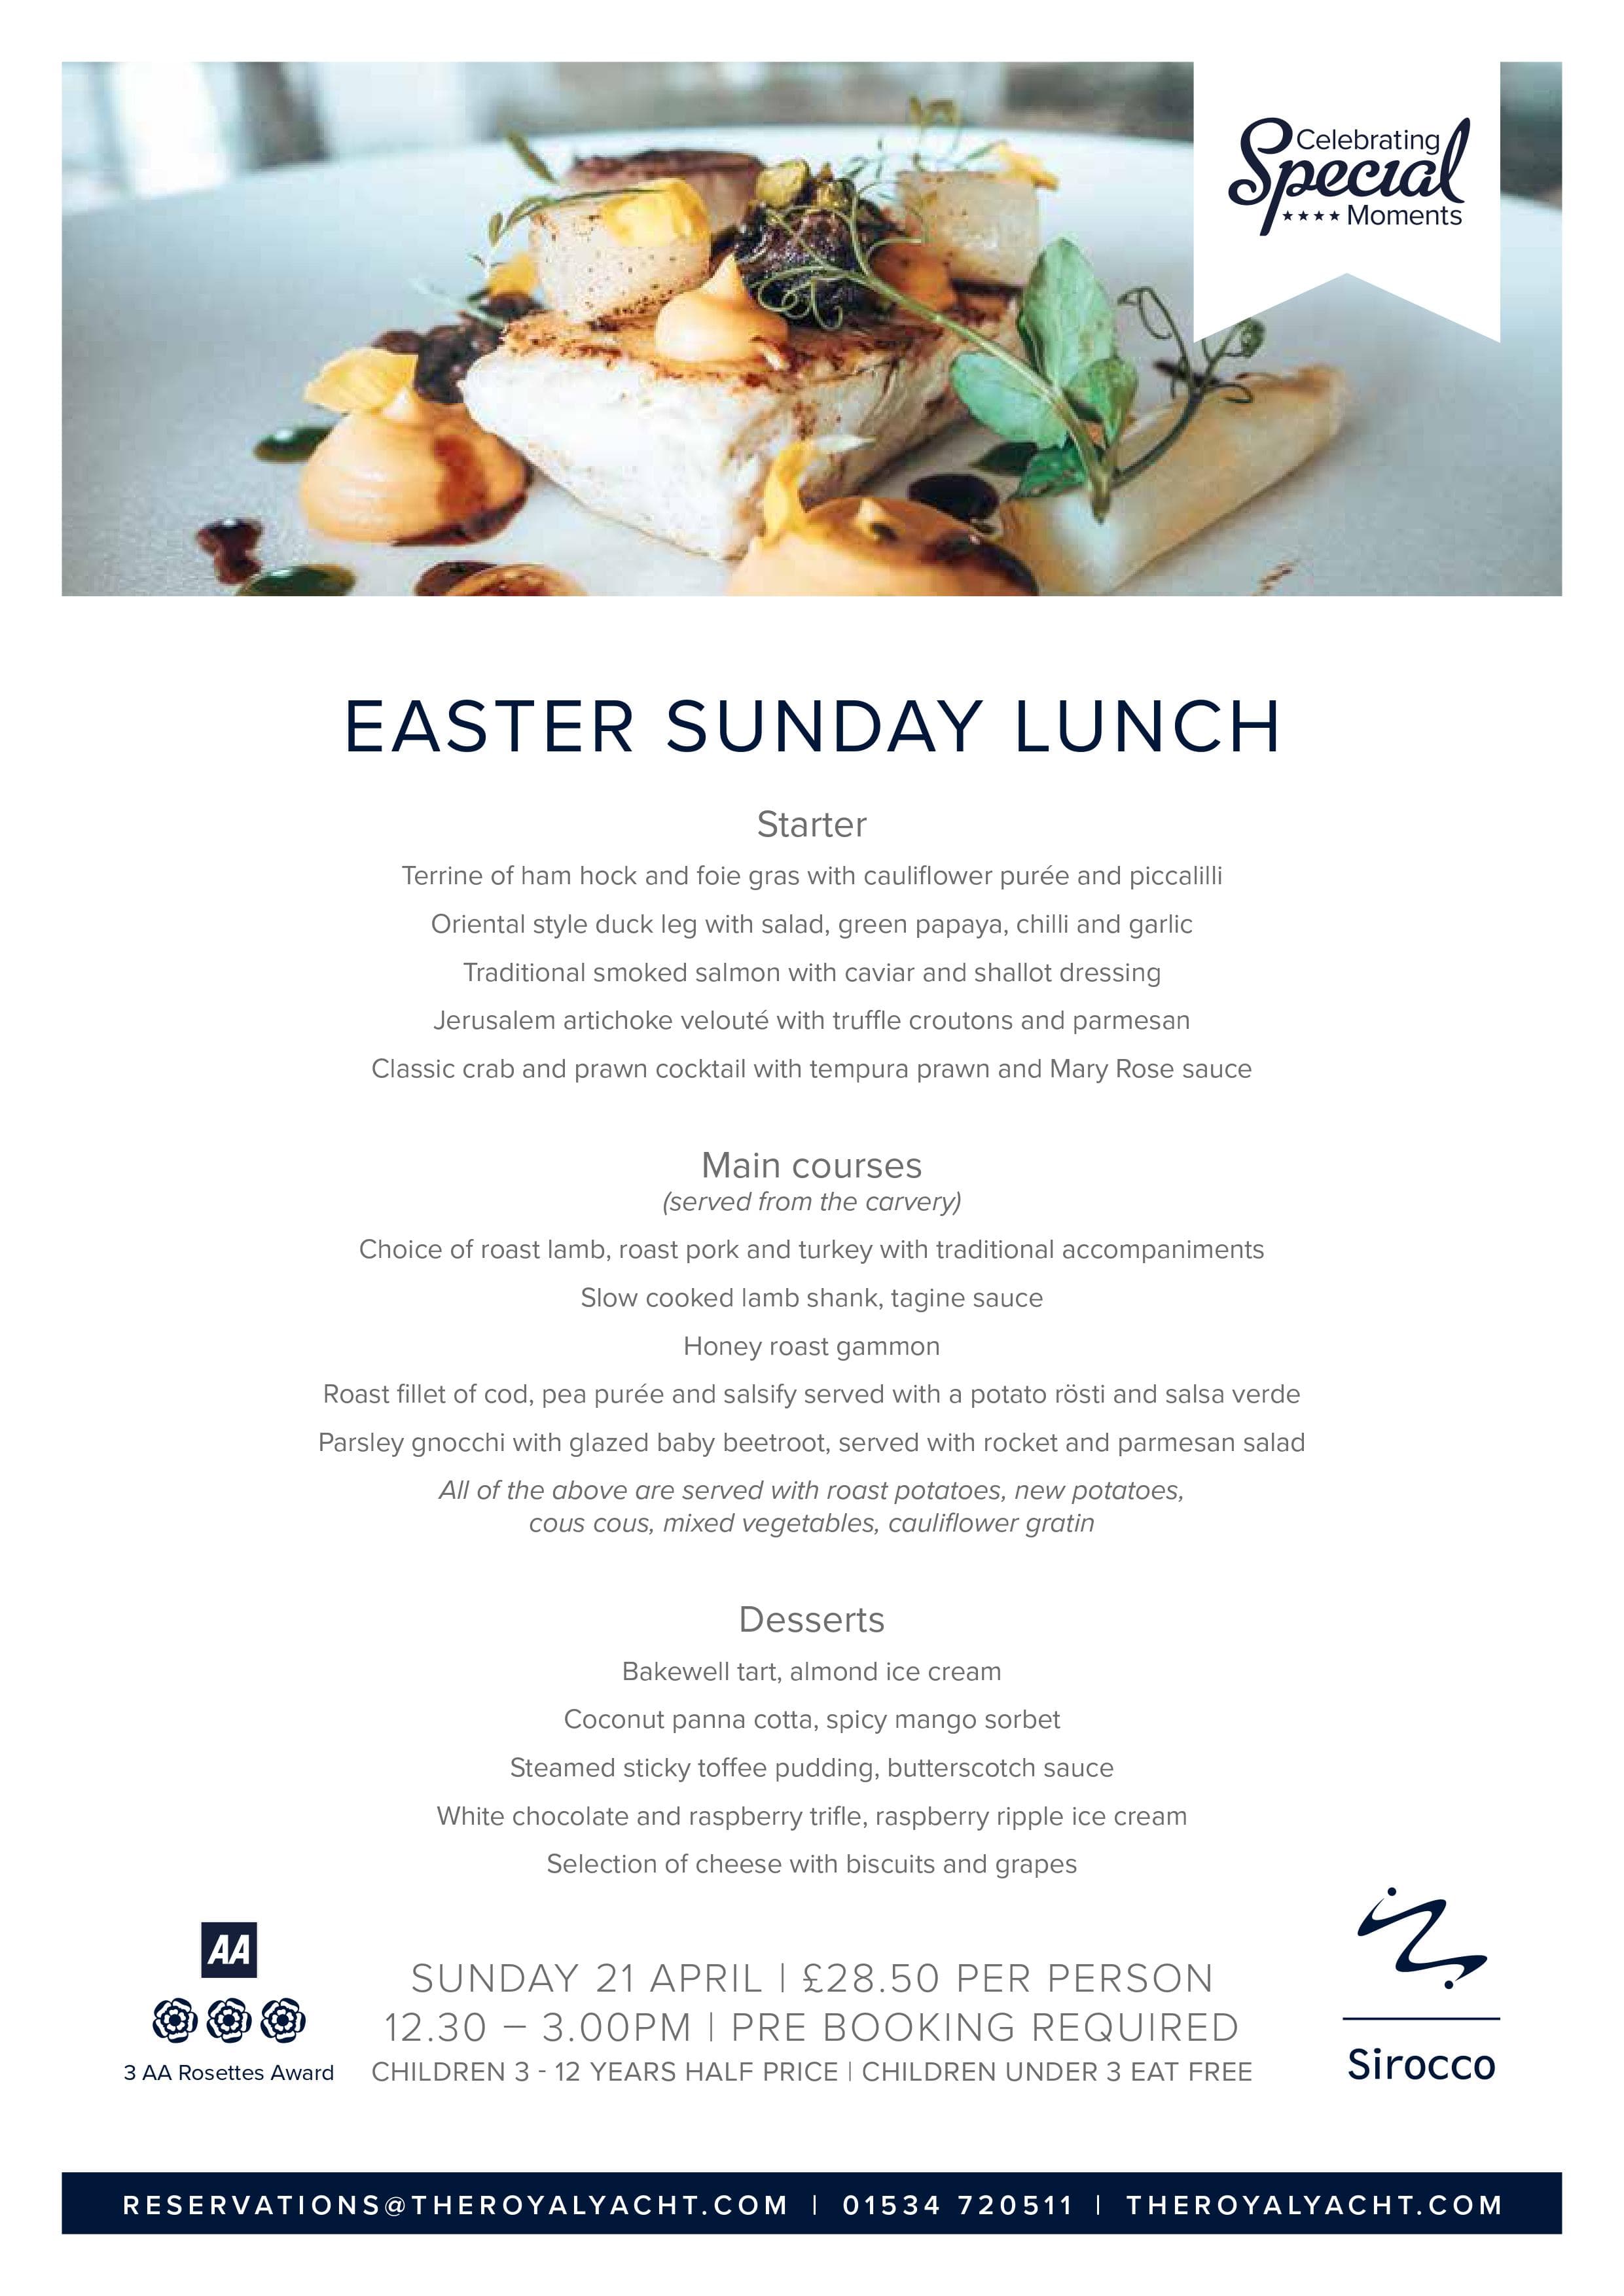 Sirocco Easter Sunday Lunch Menu